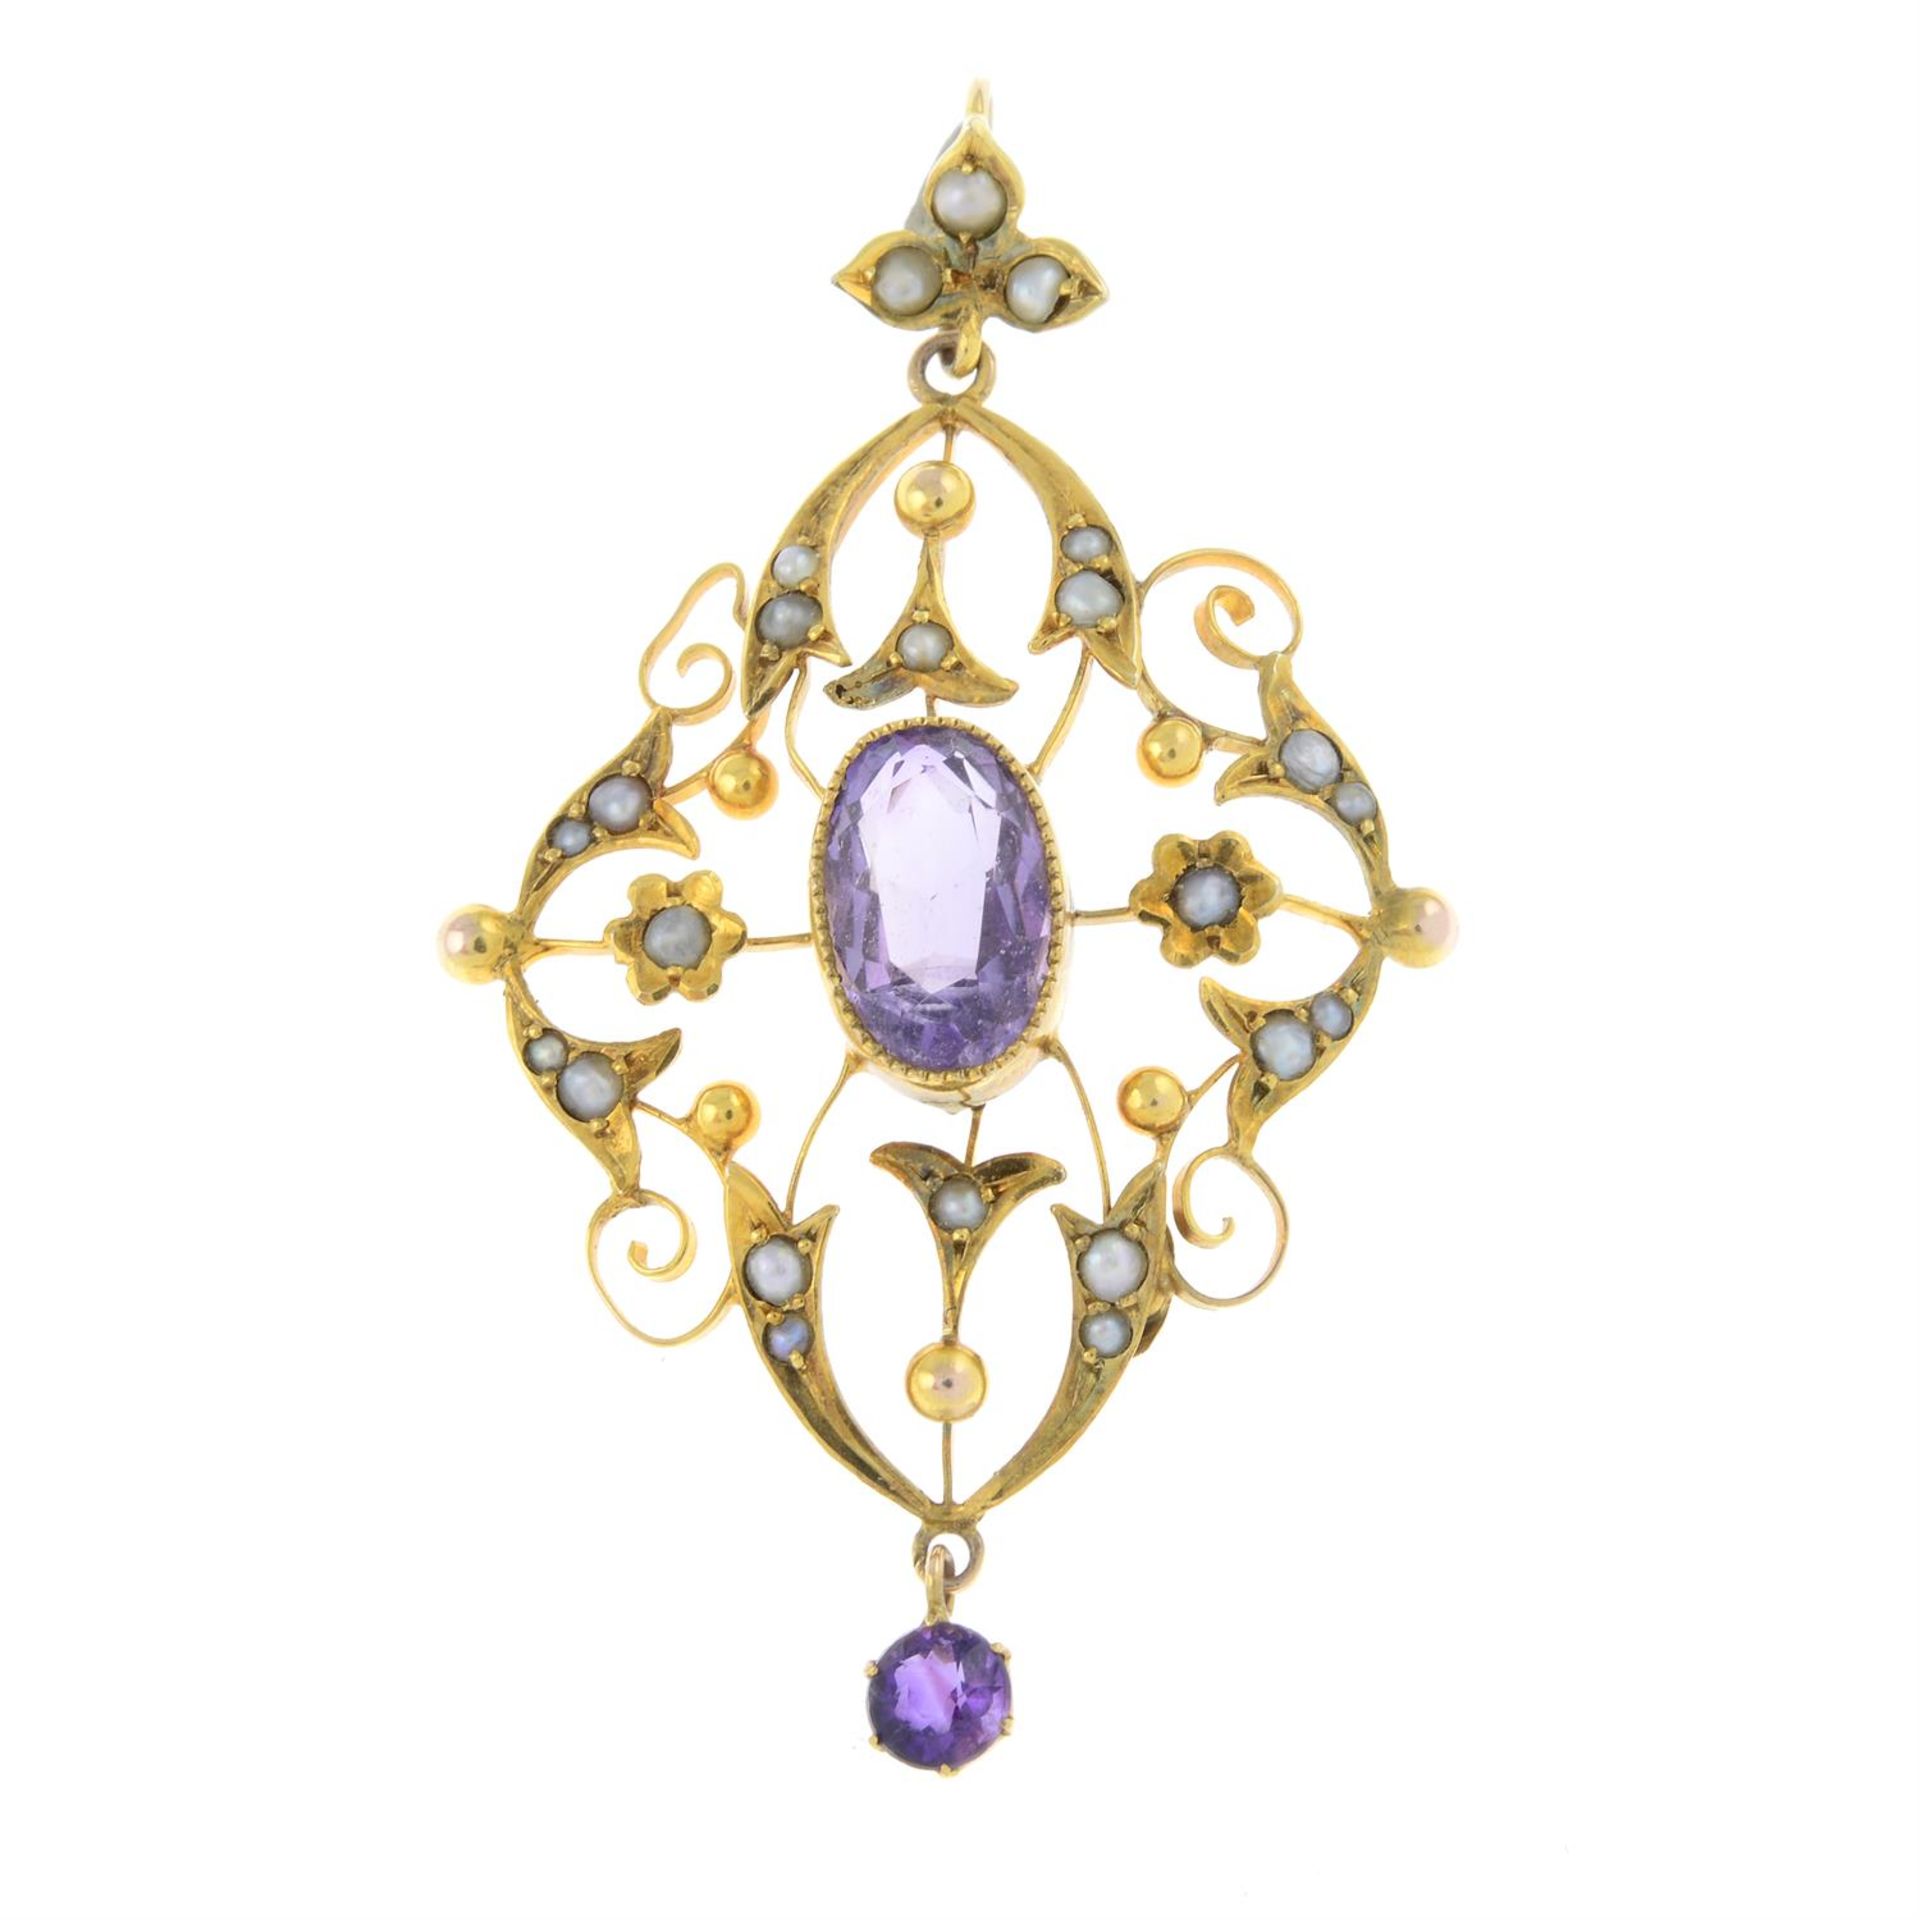 An early 20th century 9ct gold amethyst and split pearl floral pendant.